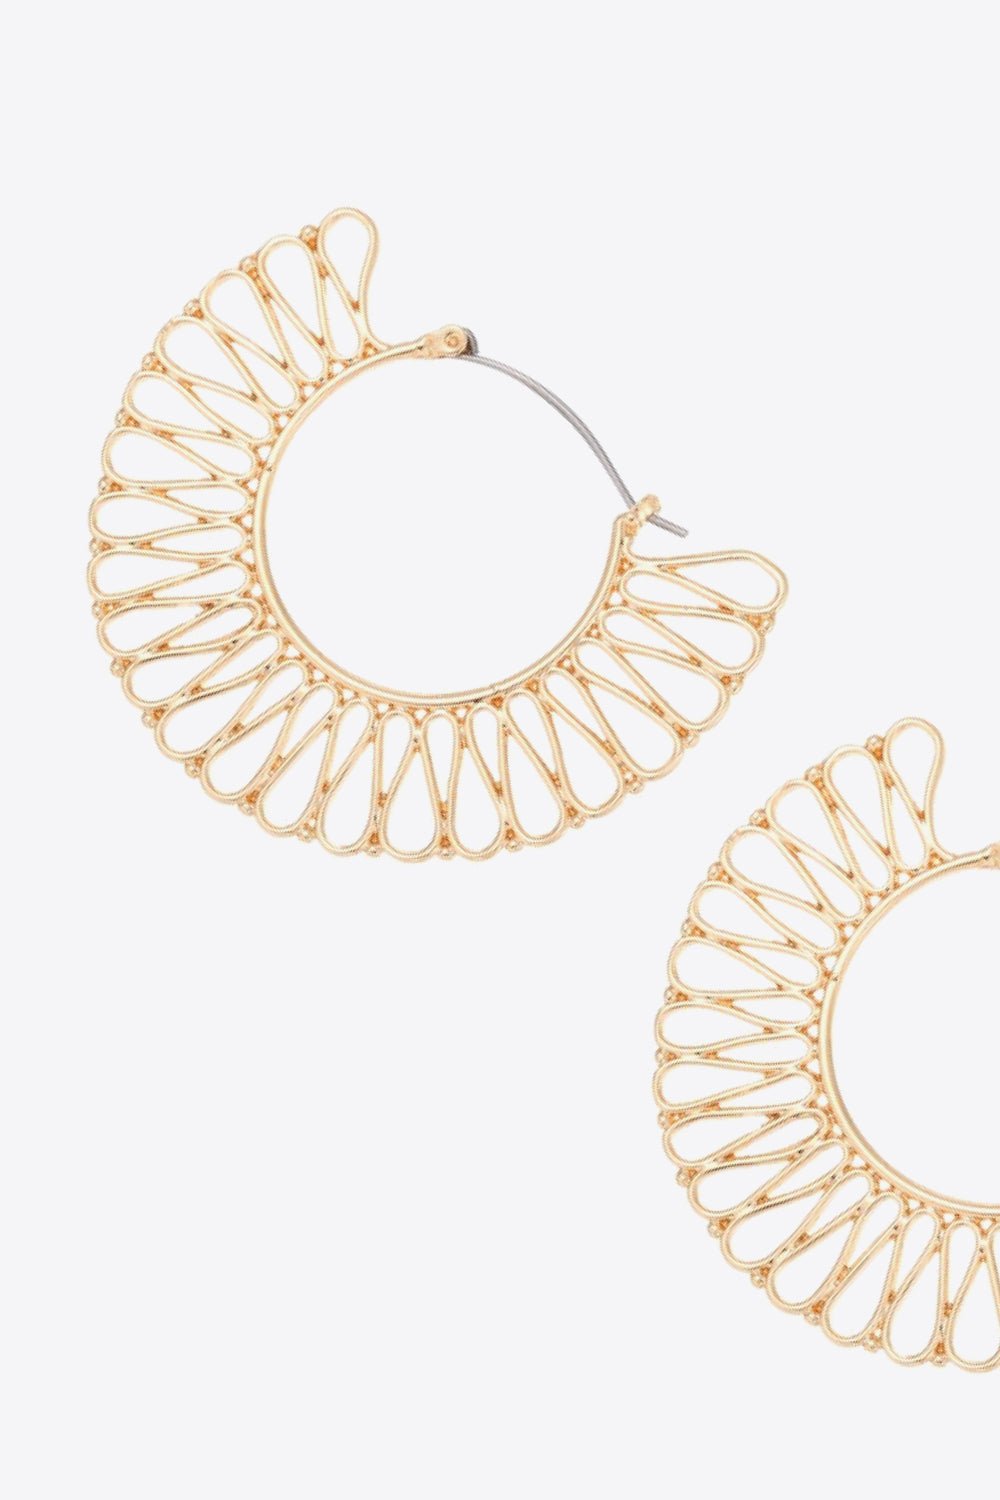 18K Gold-Plated Cutout Earrings - Uylee's Boutique